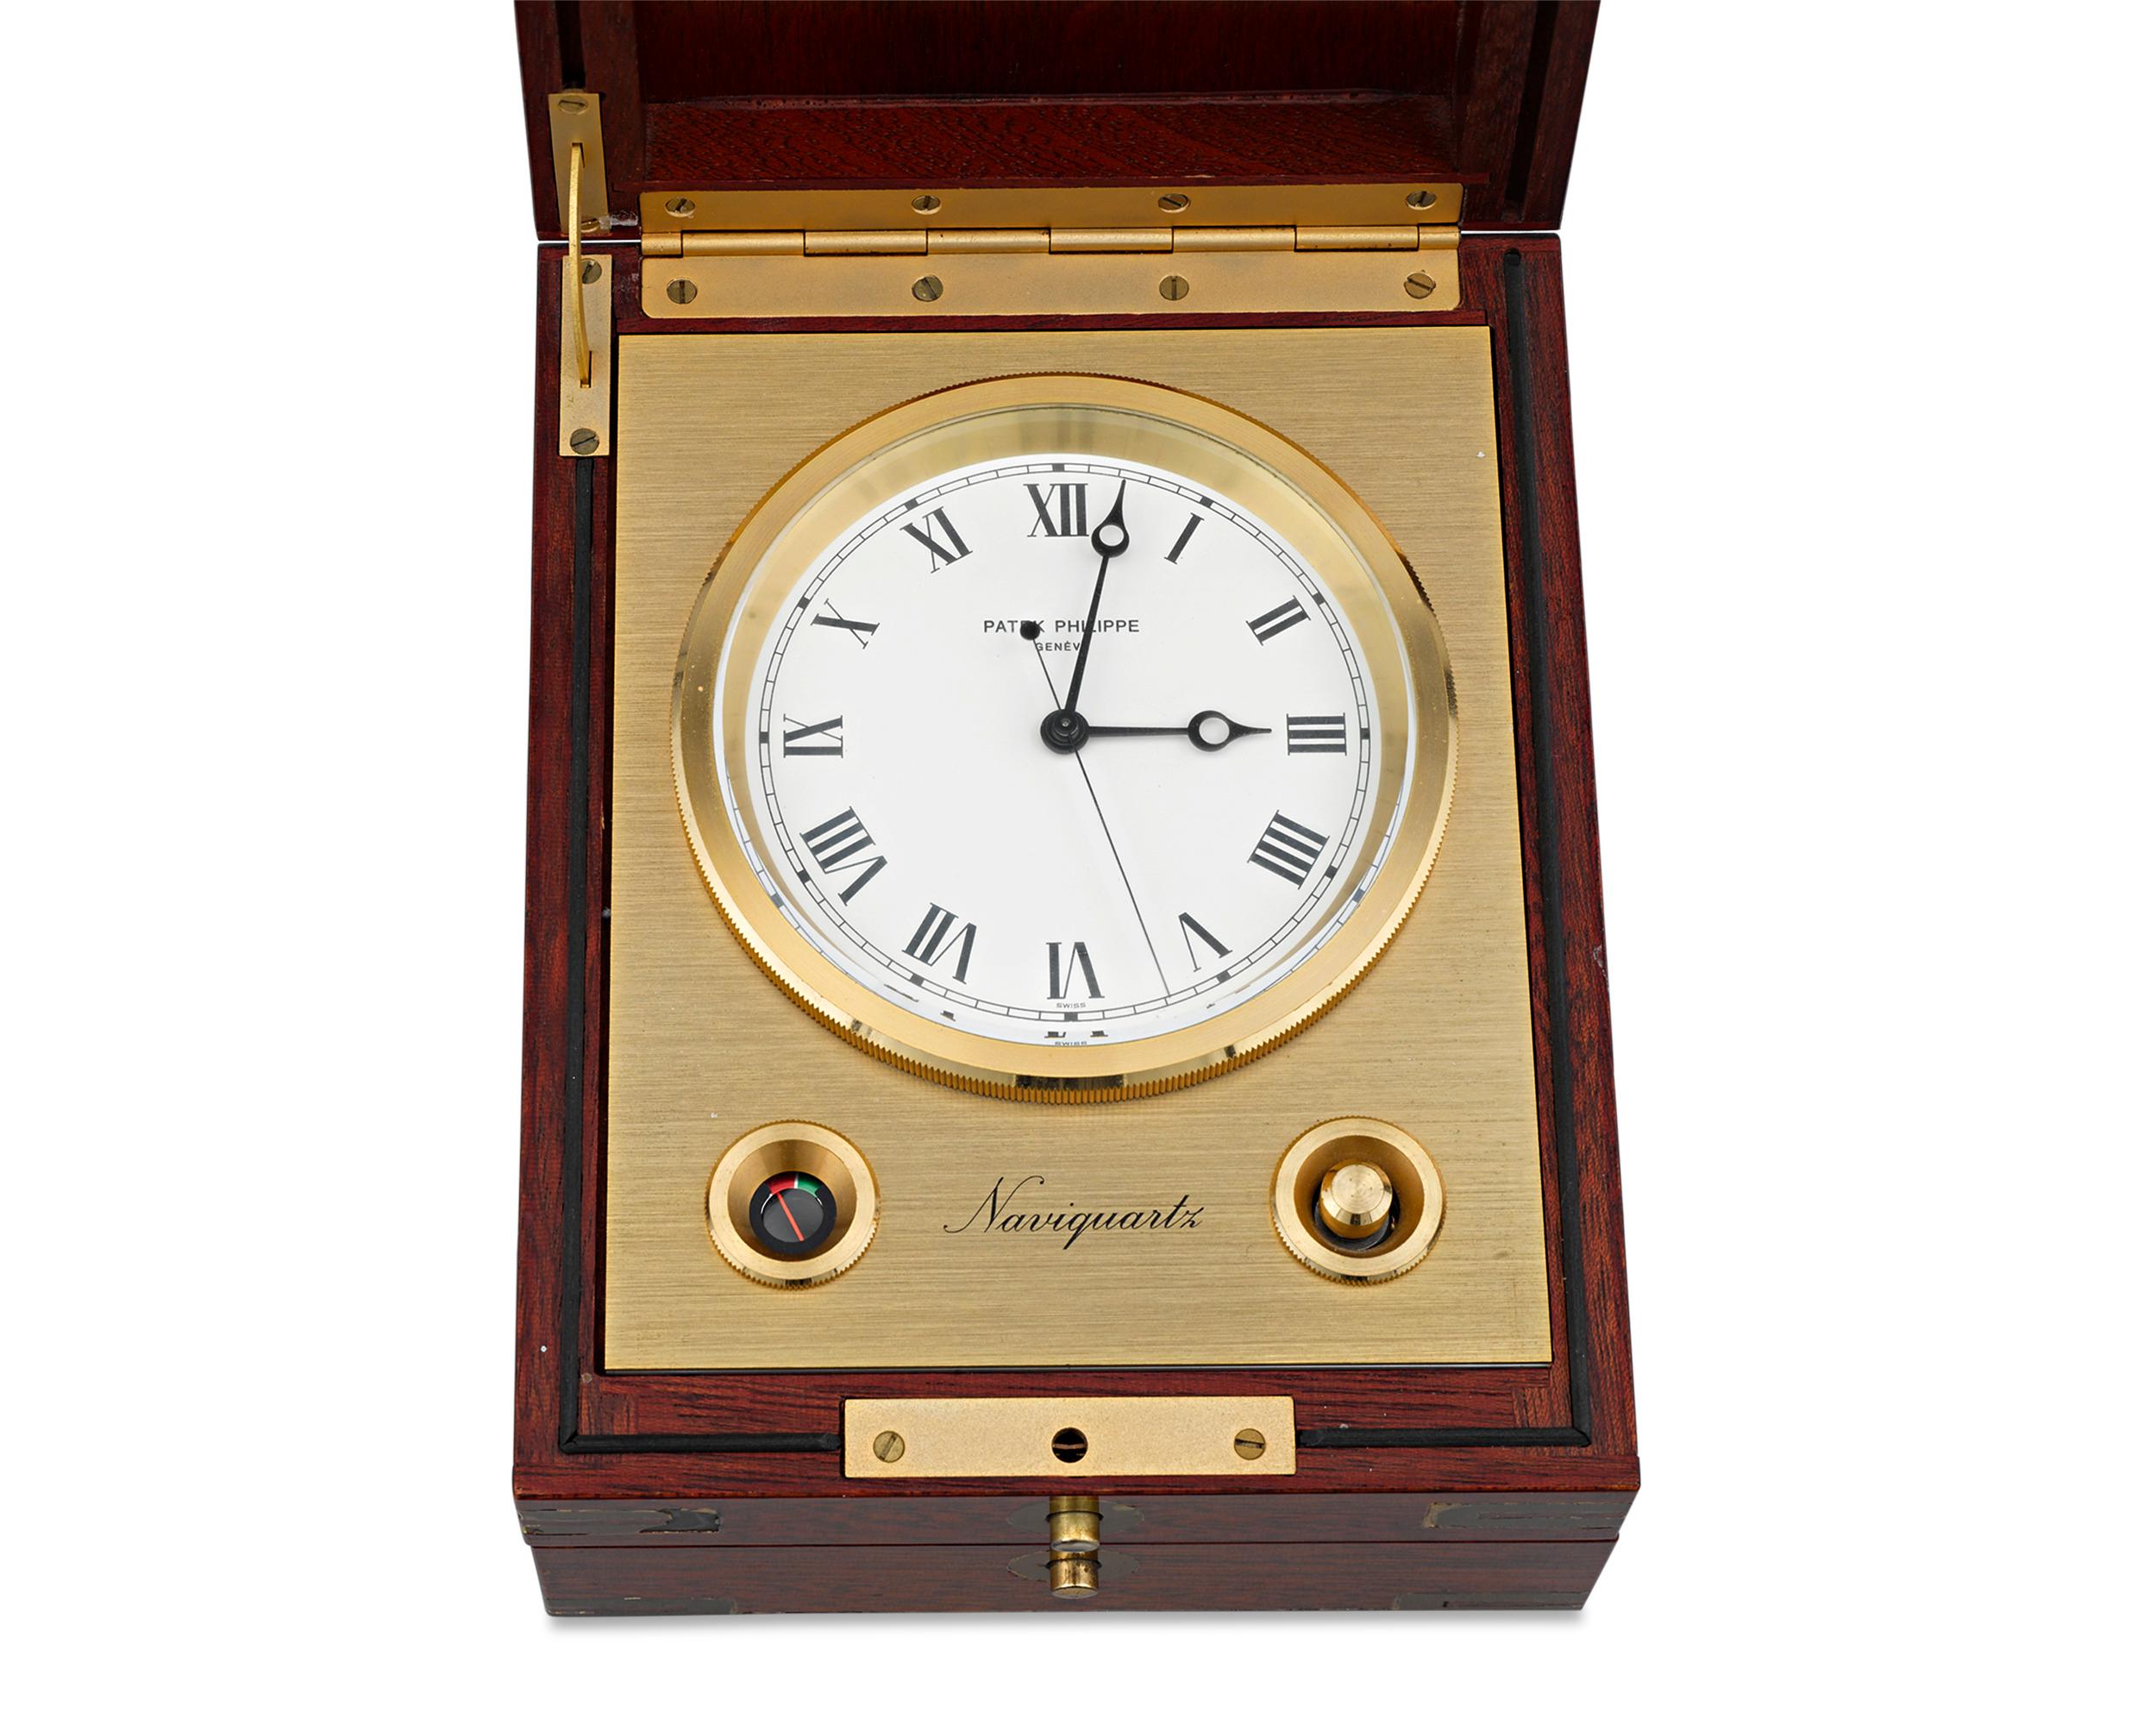 This rare Naviquartz marine chronometer table clock was crafted by the iconic Geneva watchmaking firm Patek Philippe. One of the most complex and accurate timepieces ever made, the chronometer is specially designed to be used for navigation at sea.